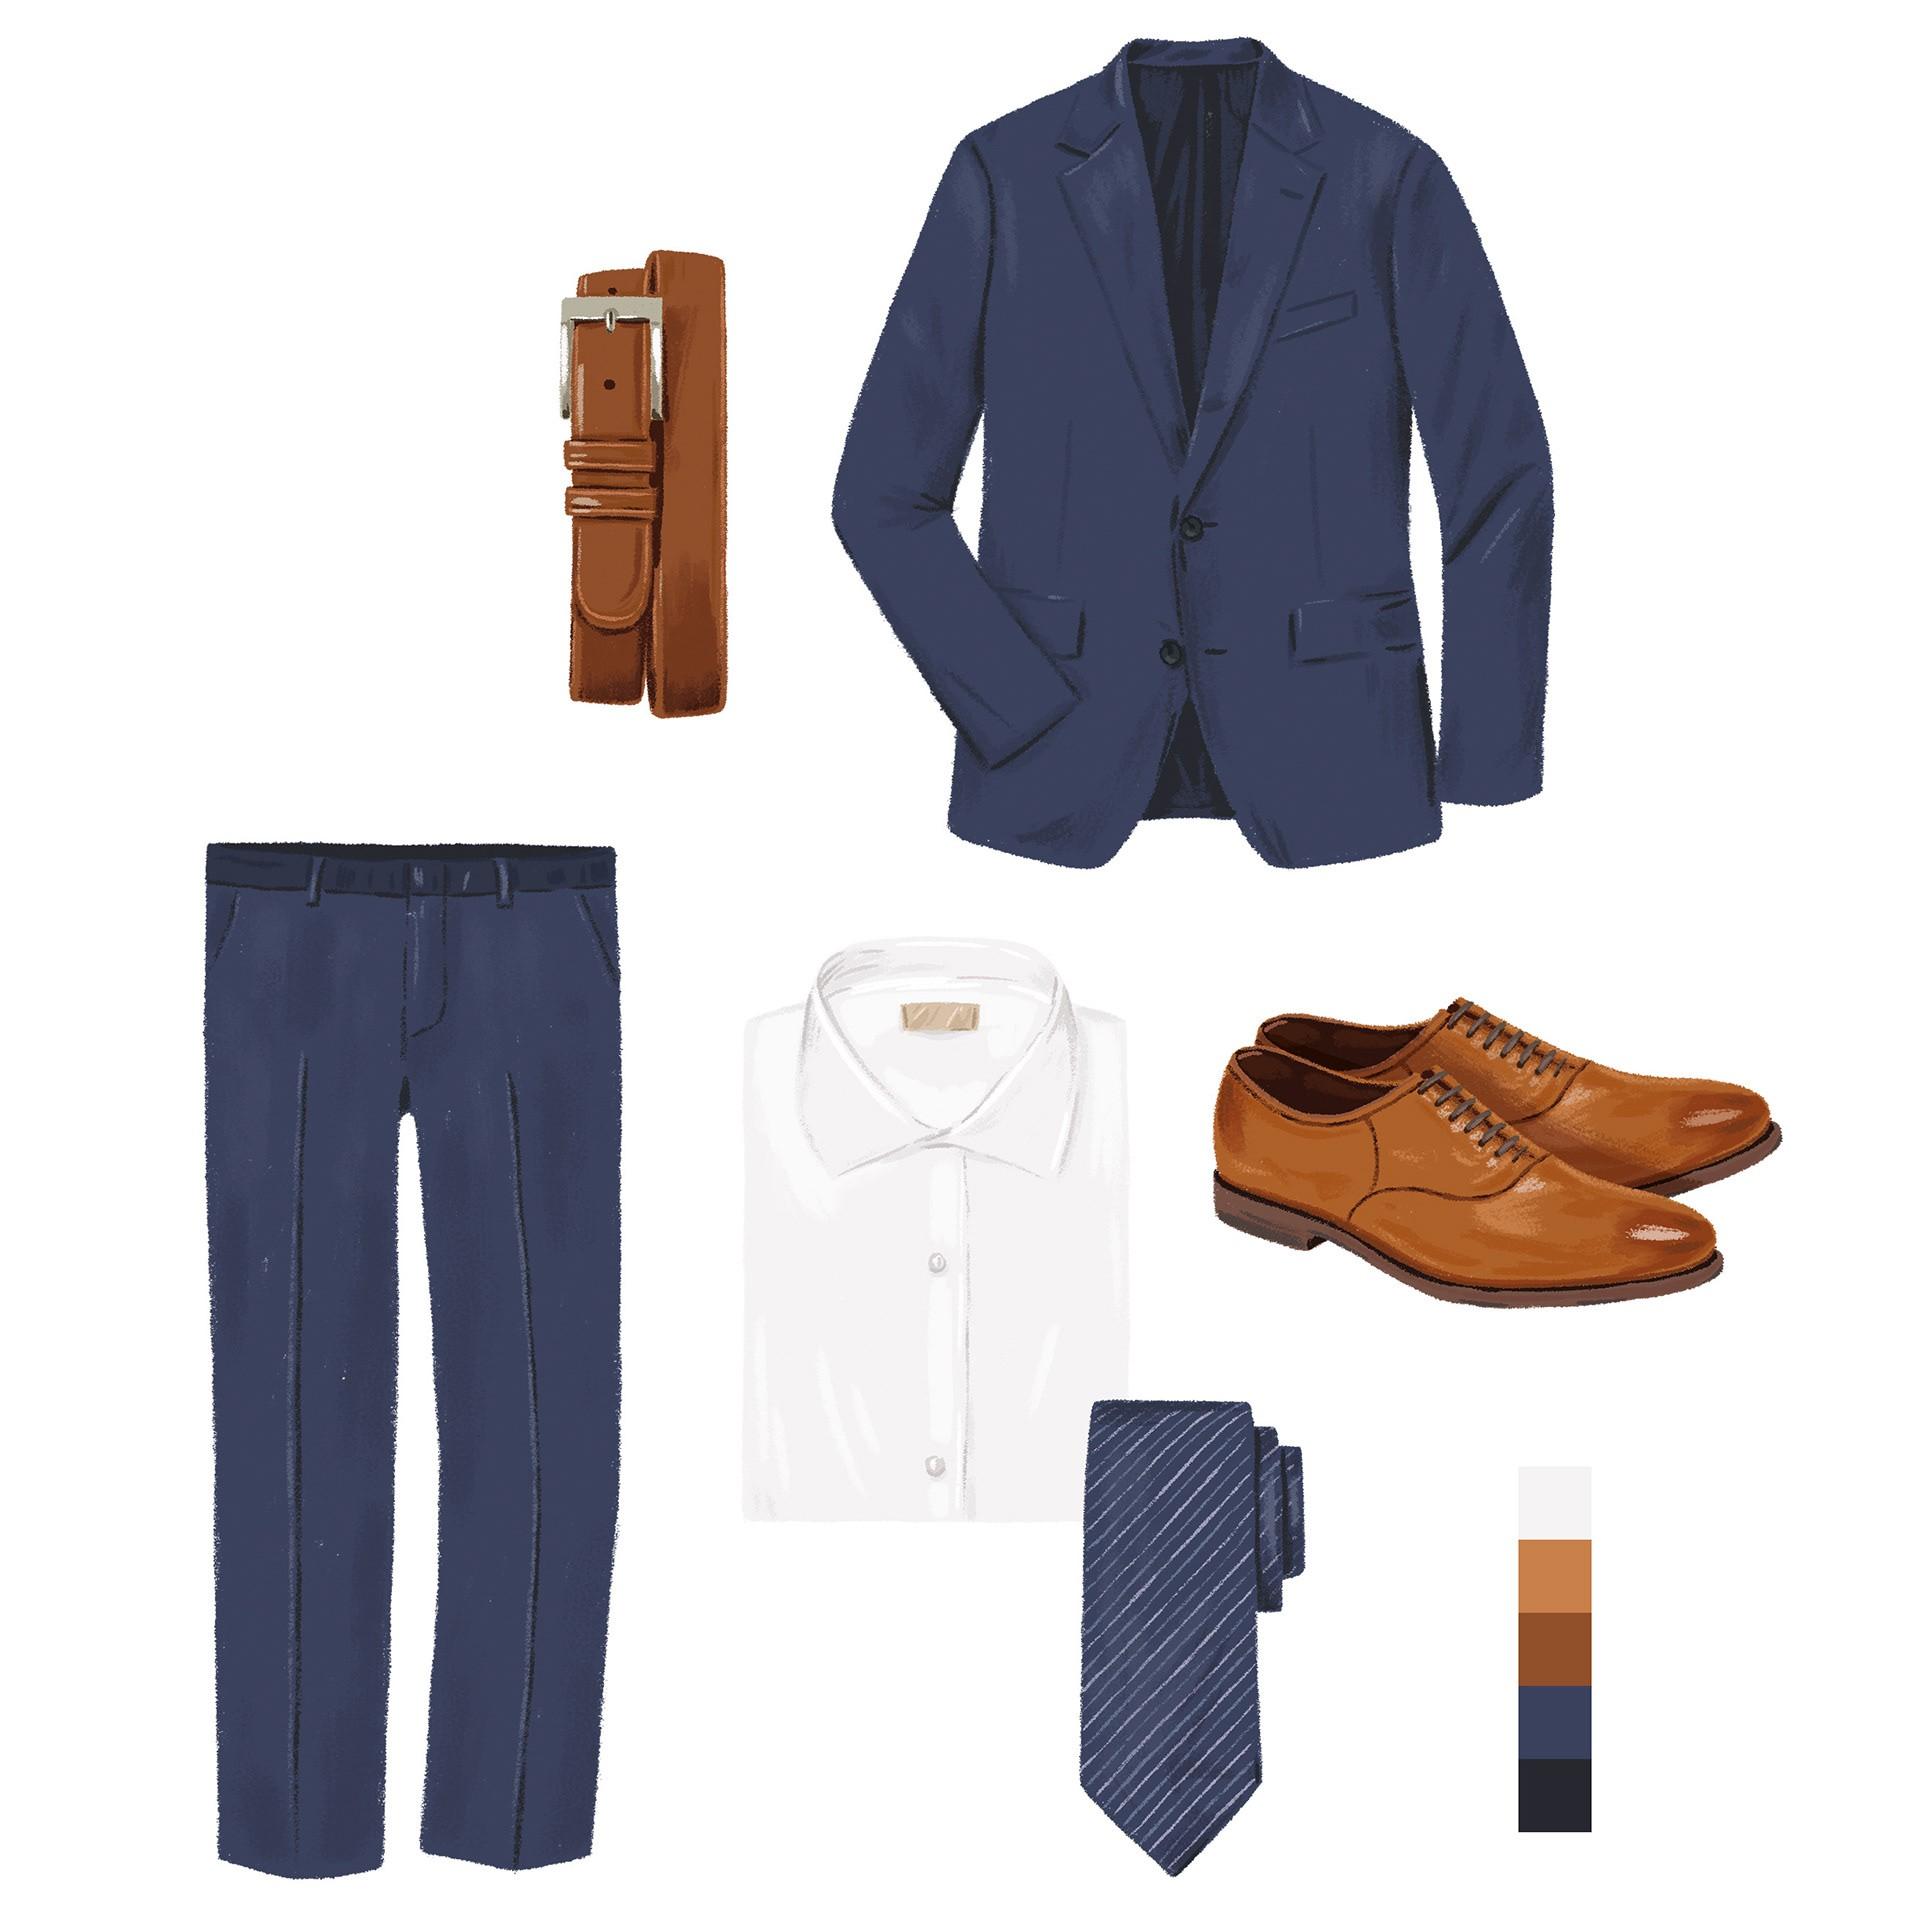 Outfit Tips for Men